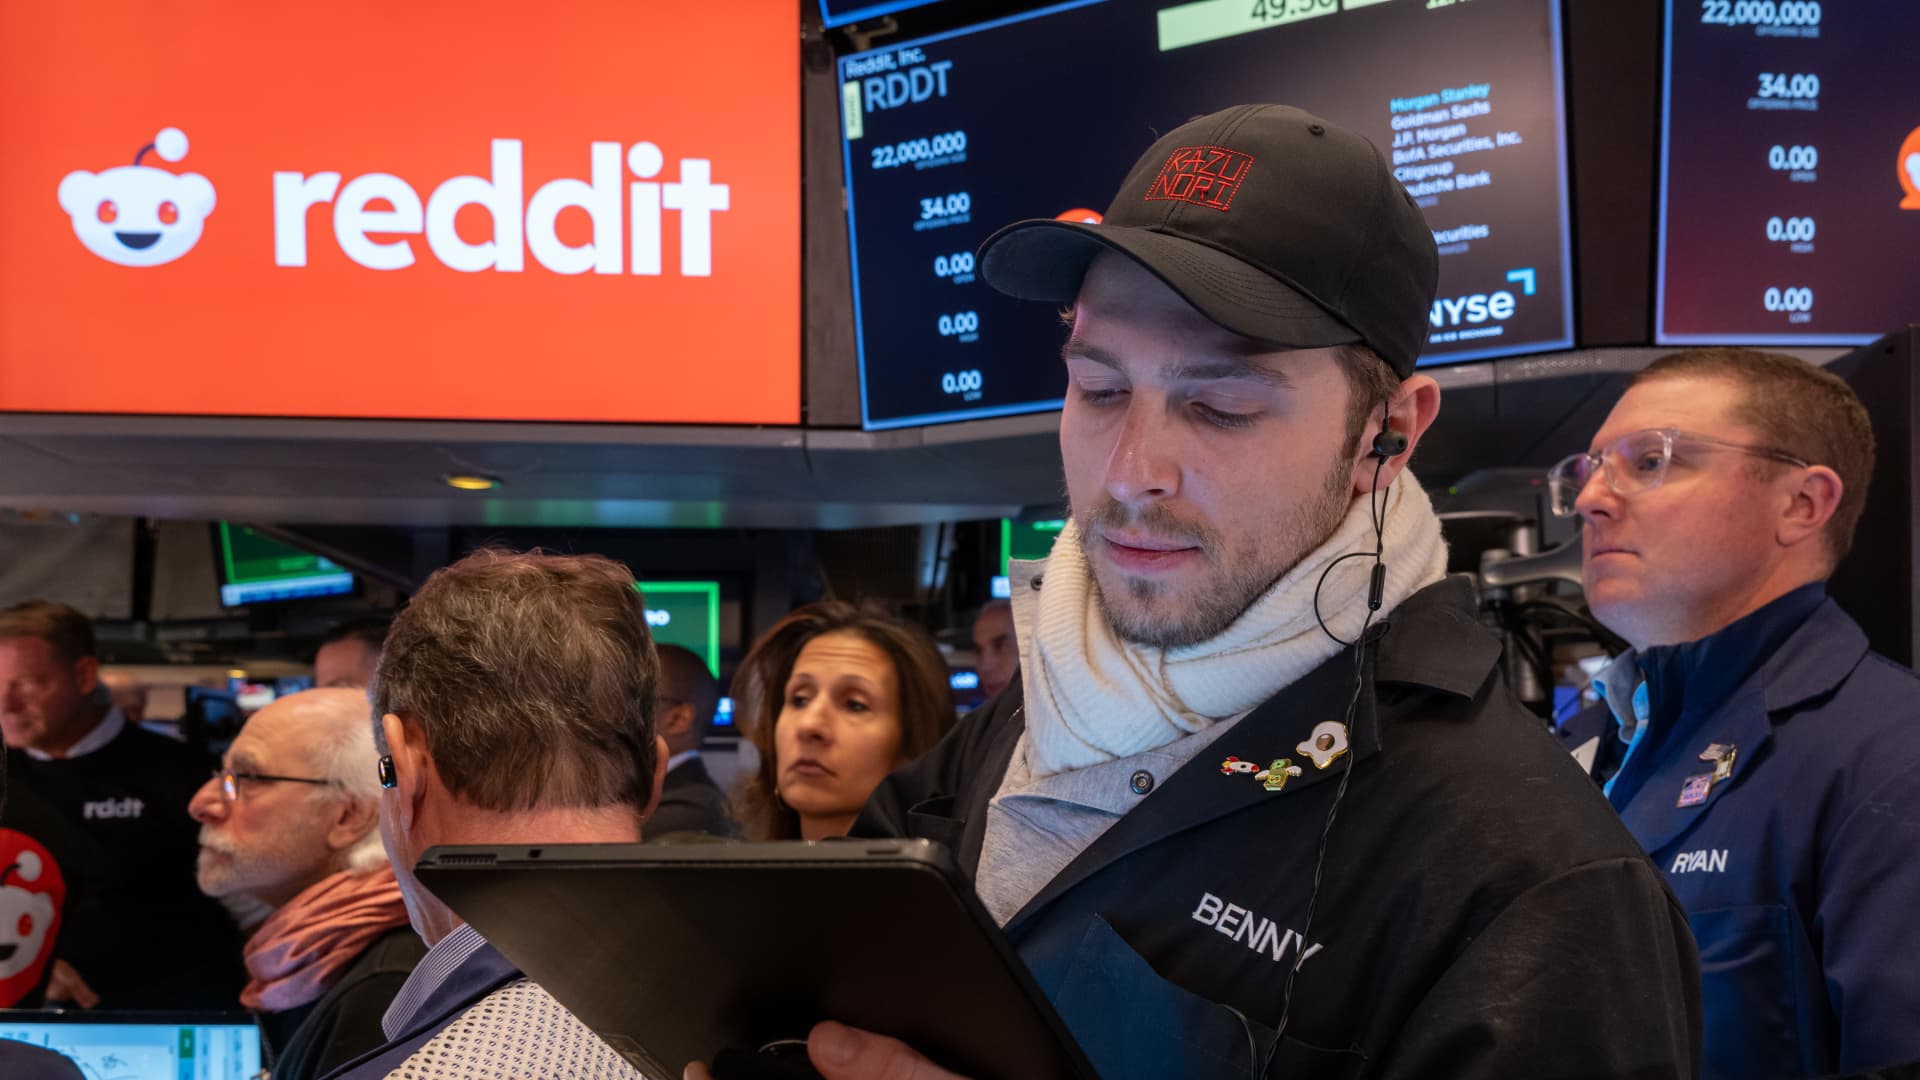 Shares closed at $49.32, ending the week below their closing price on Reddit's first day of trading on the New York Stock Exchange. They closed a